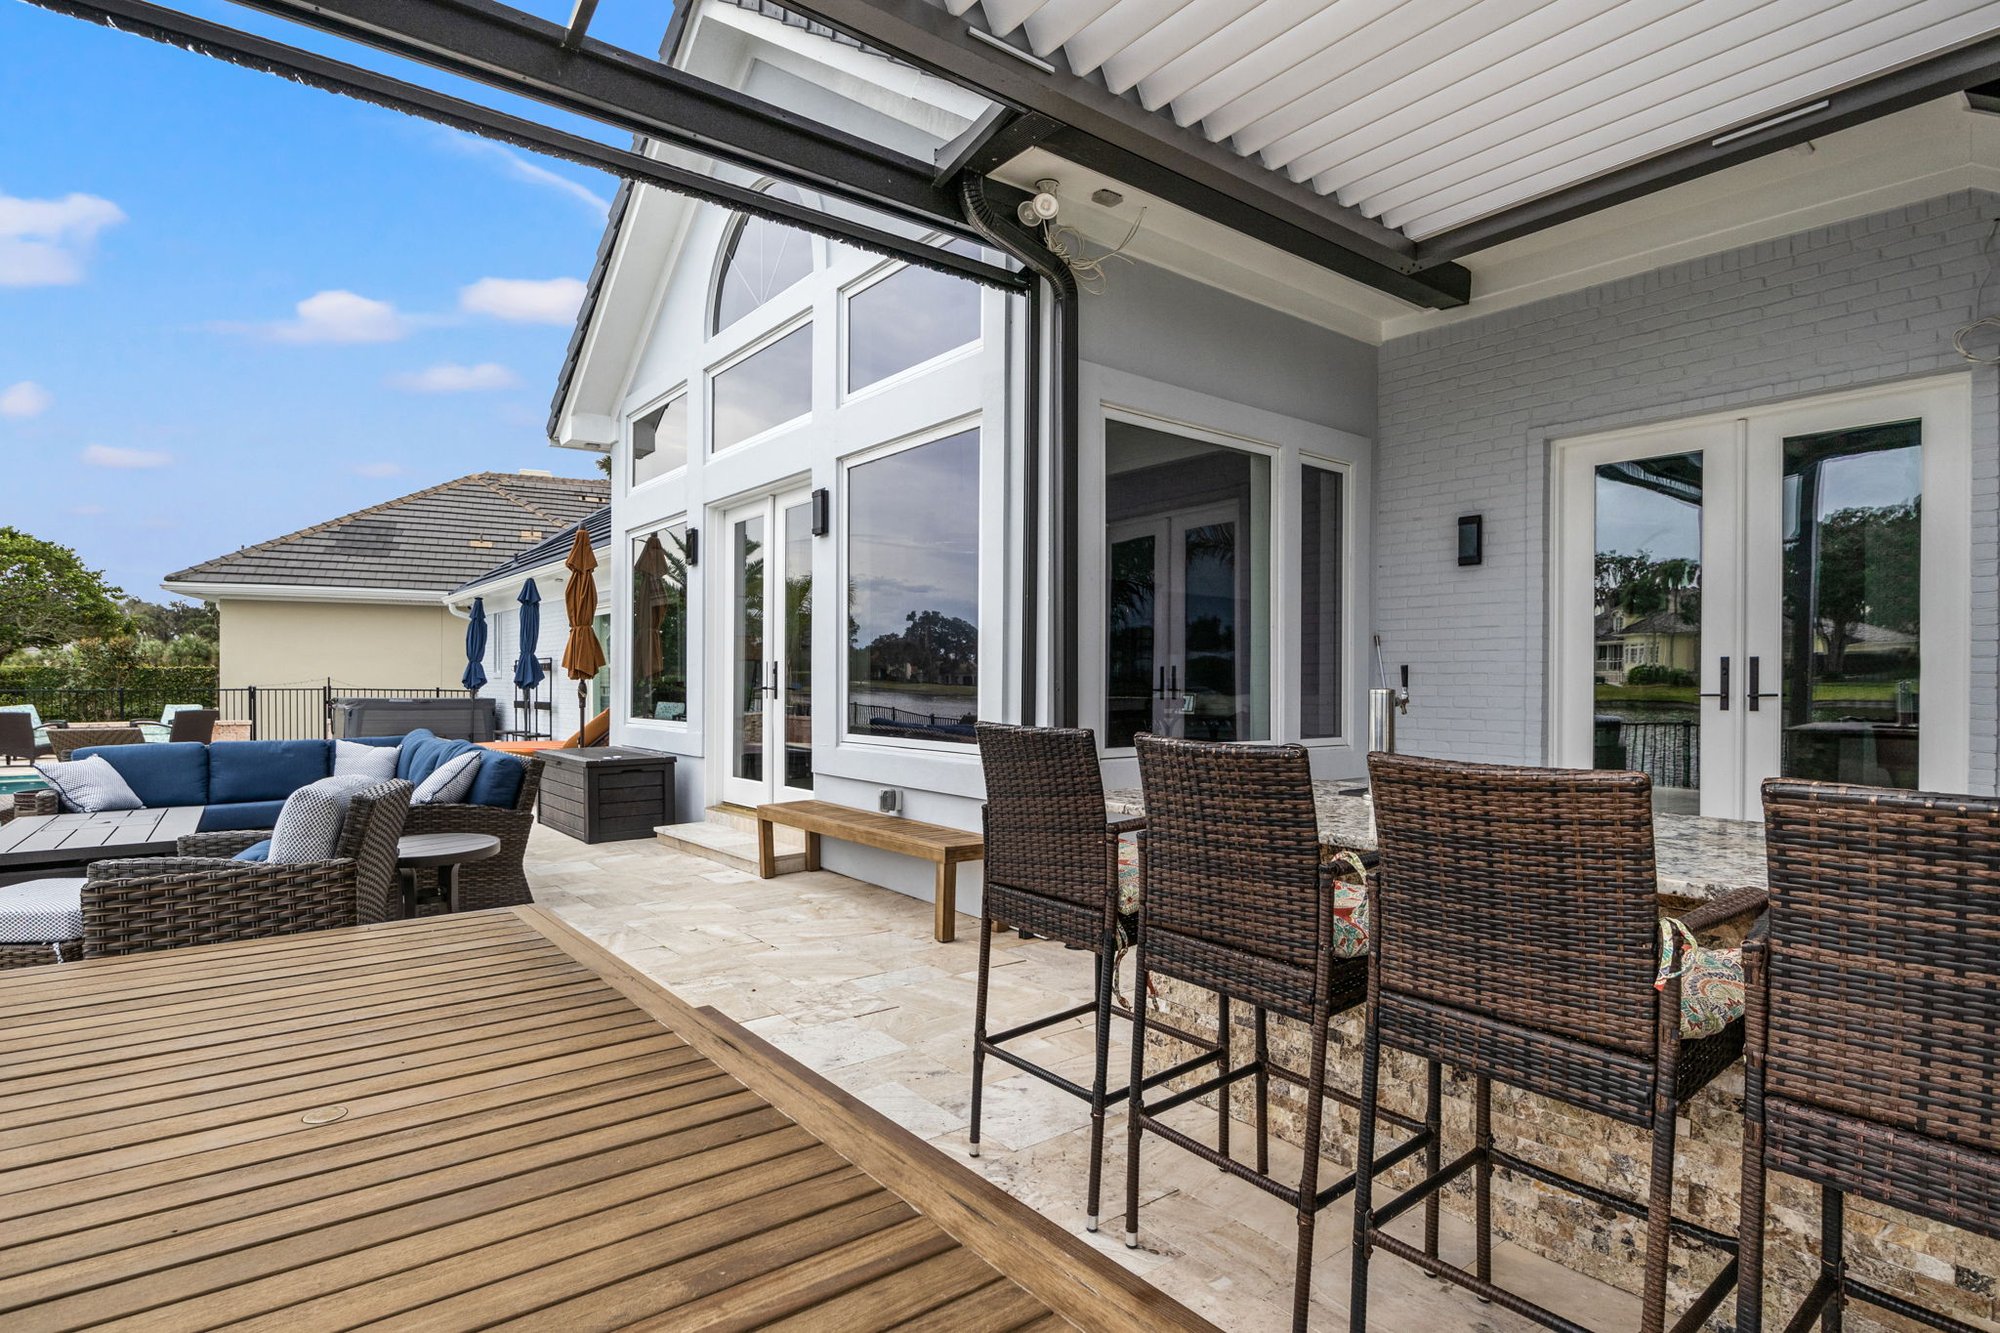 Outdoor Living Area in Jacksonville with Pergola and Dining Area